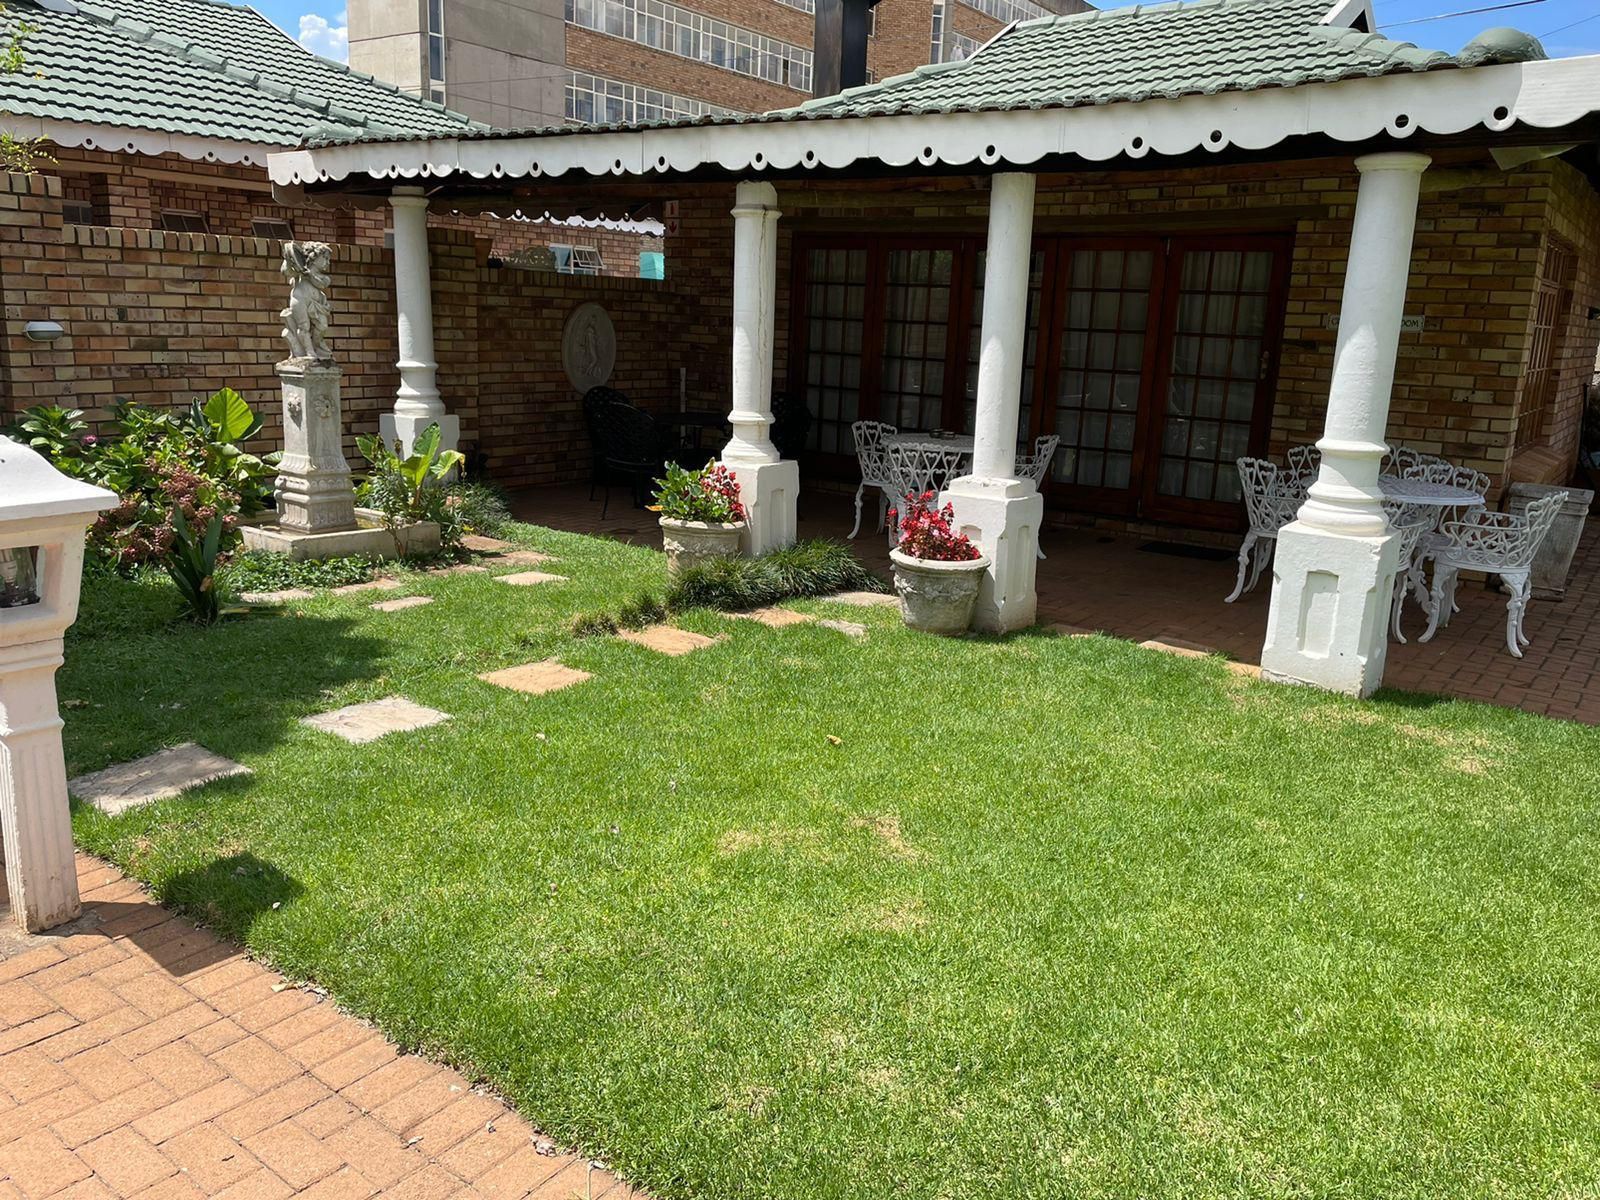 Alec Wright Guest House Potchefstroom North West Province South Africa House, Building, Architecture, Garden, Nature, Plant